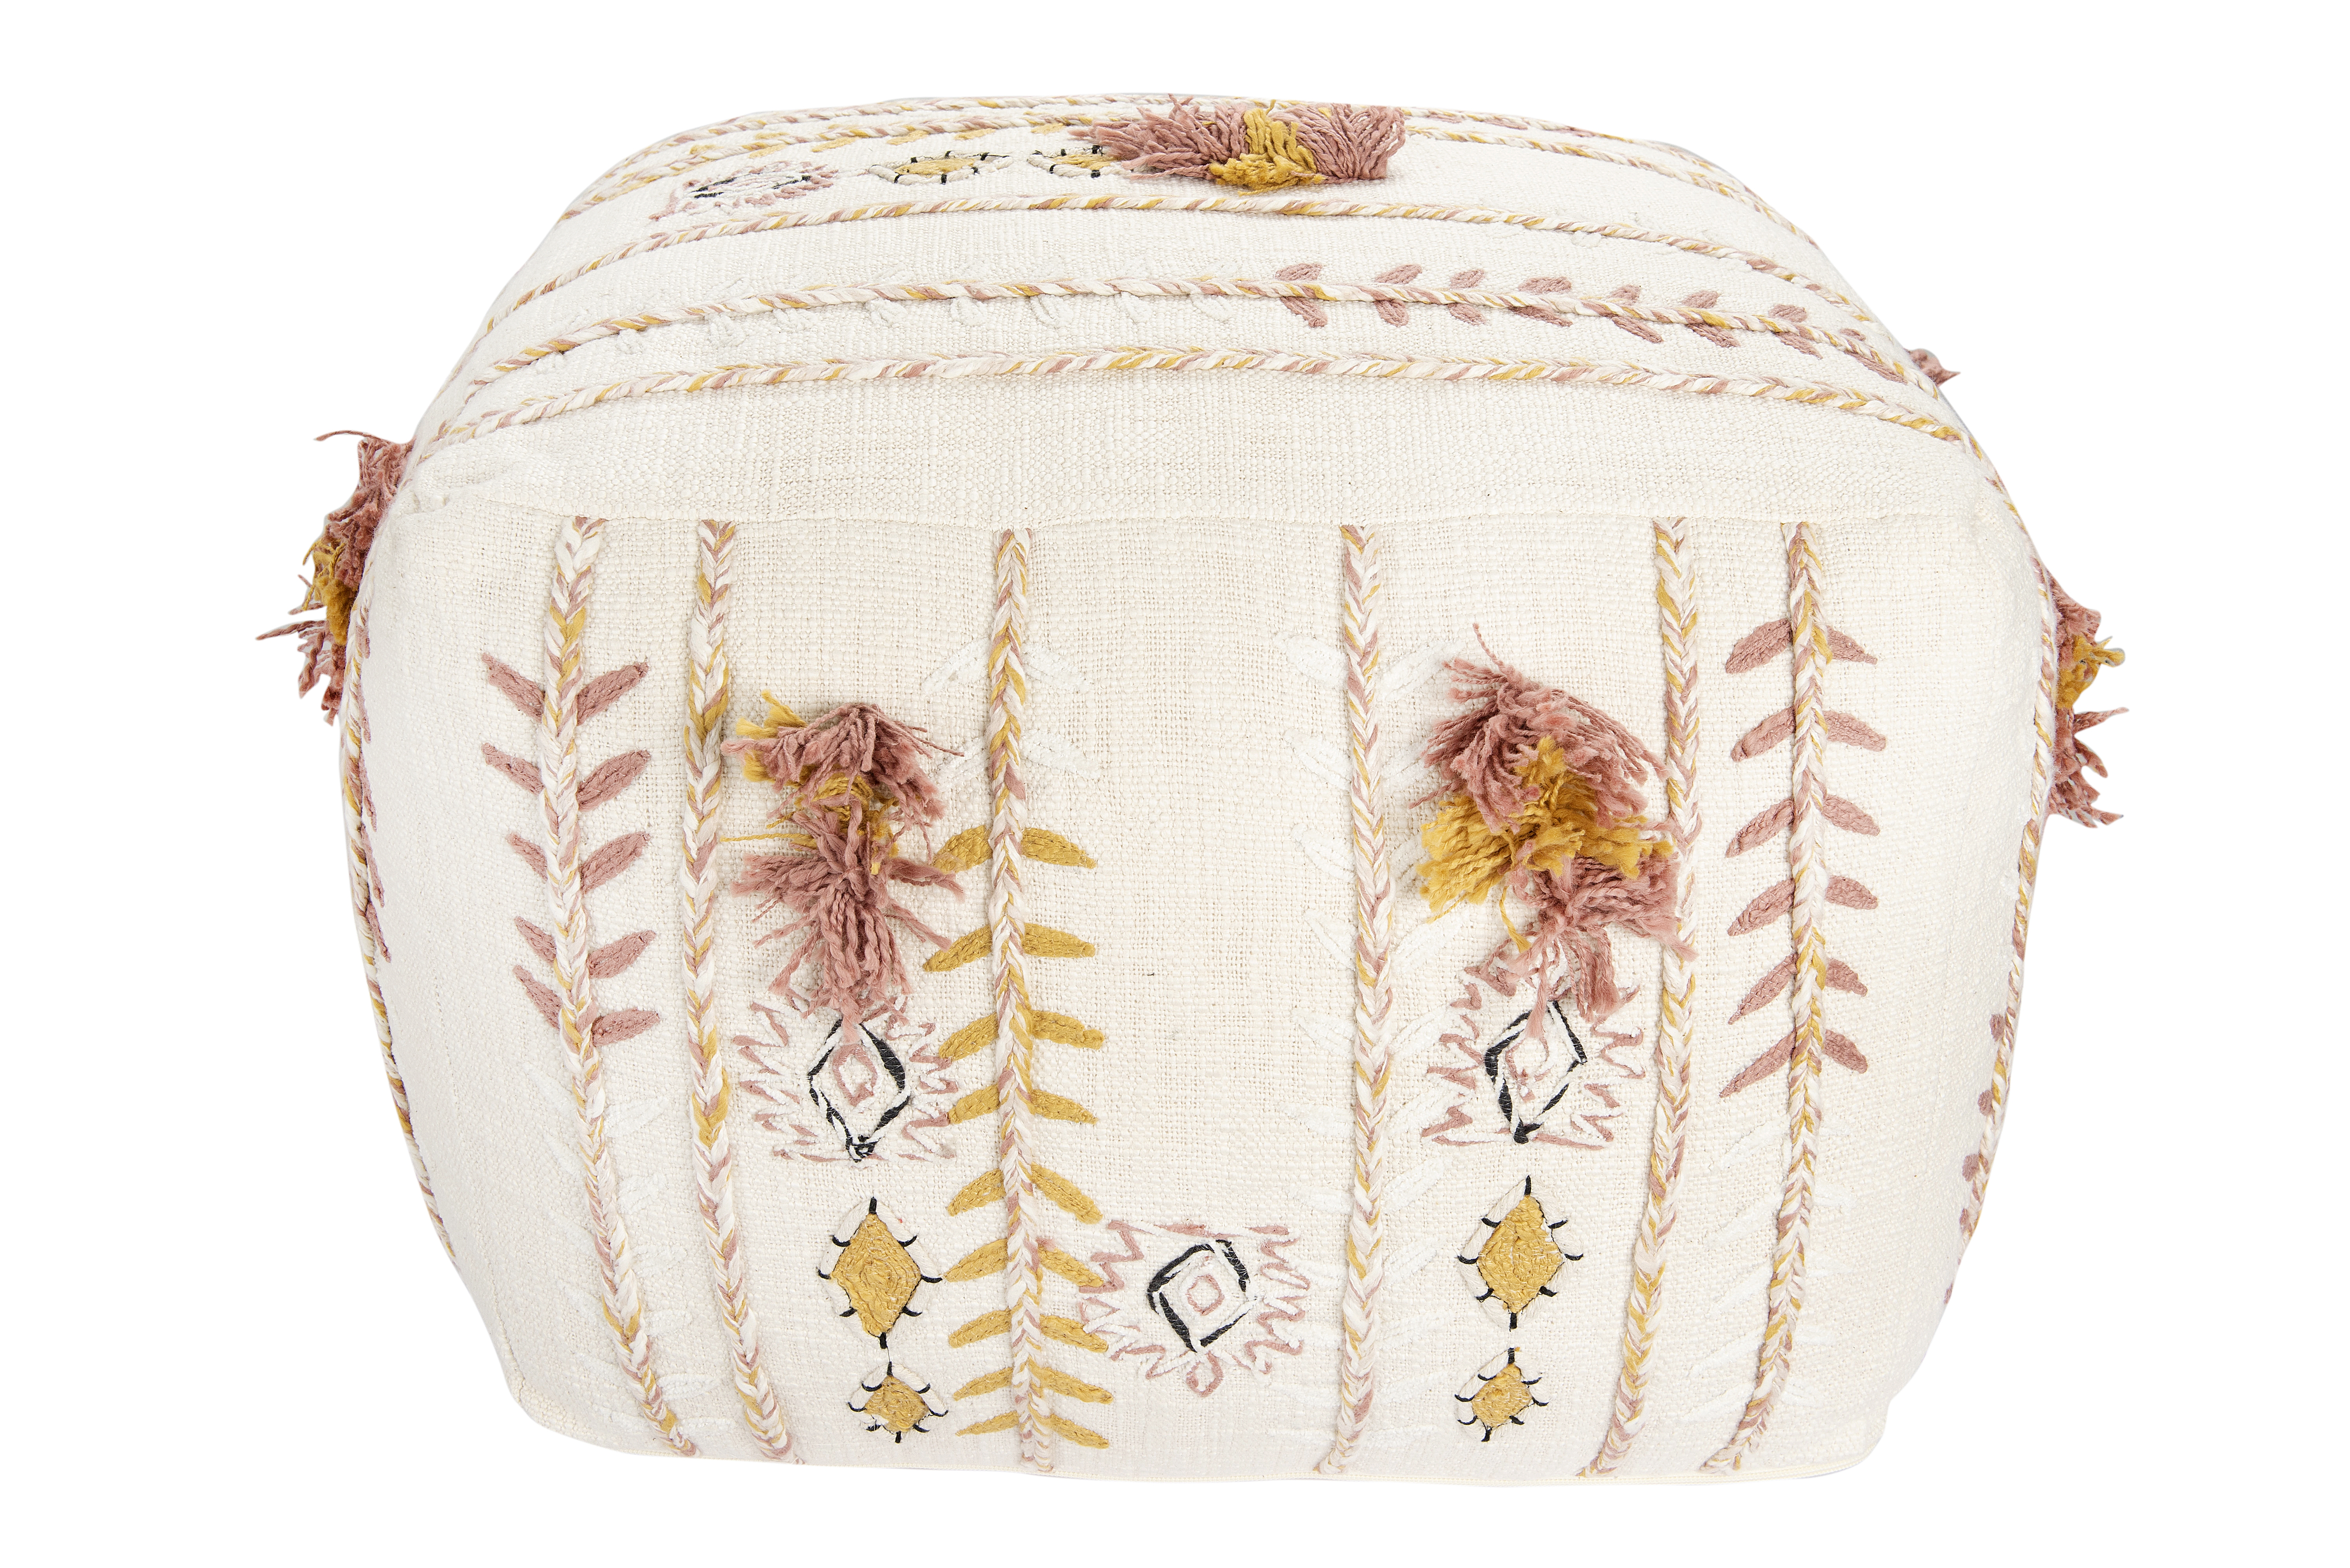 Square Cream Cotton Pouf with Misty Rose & Mustard Yellow Embroidery and Pom Poms - Image 0